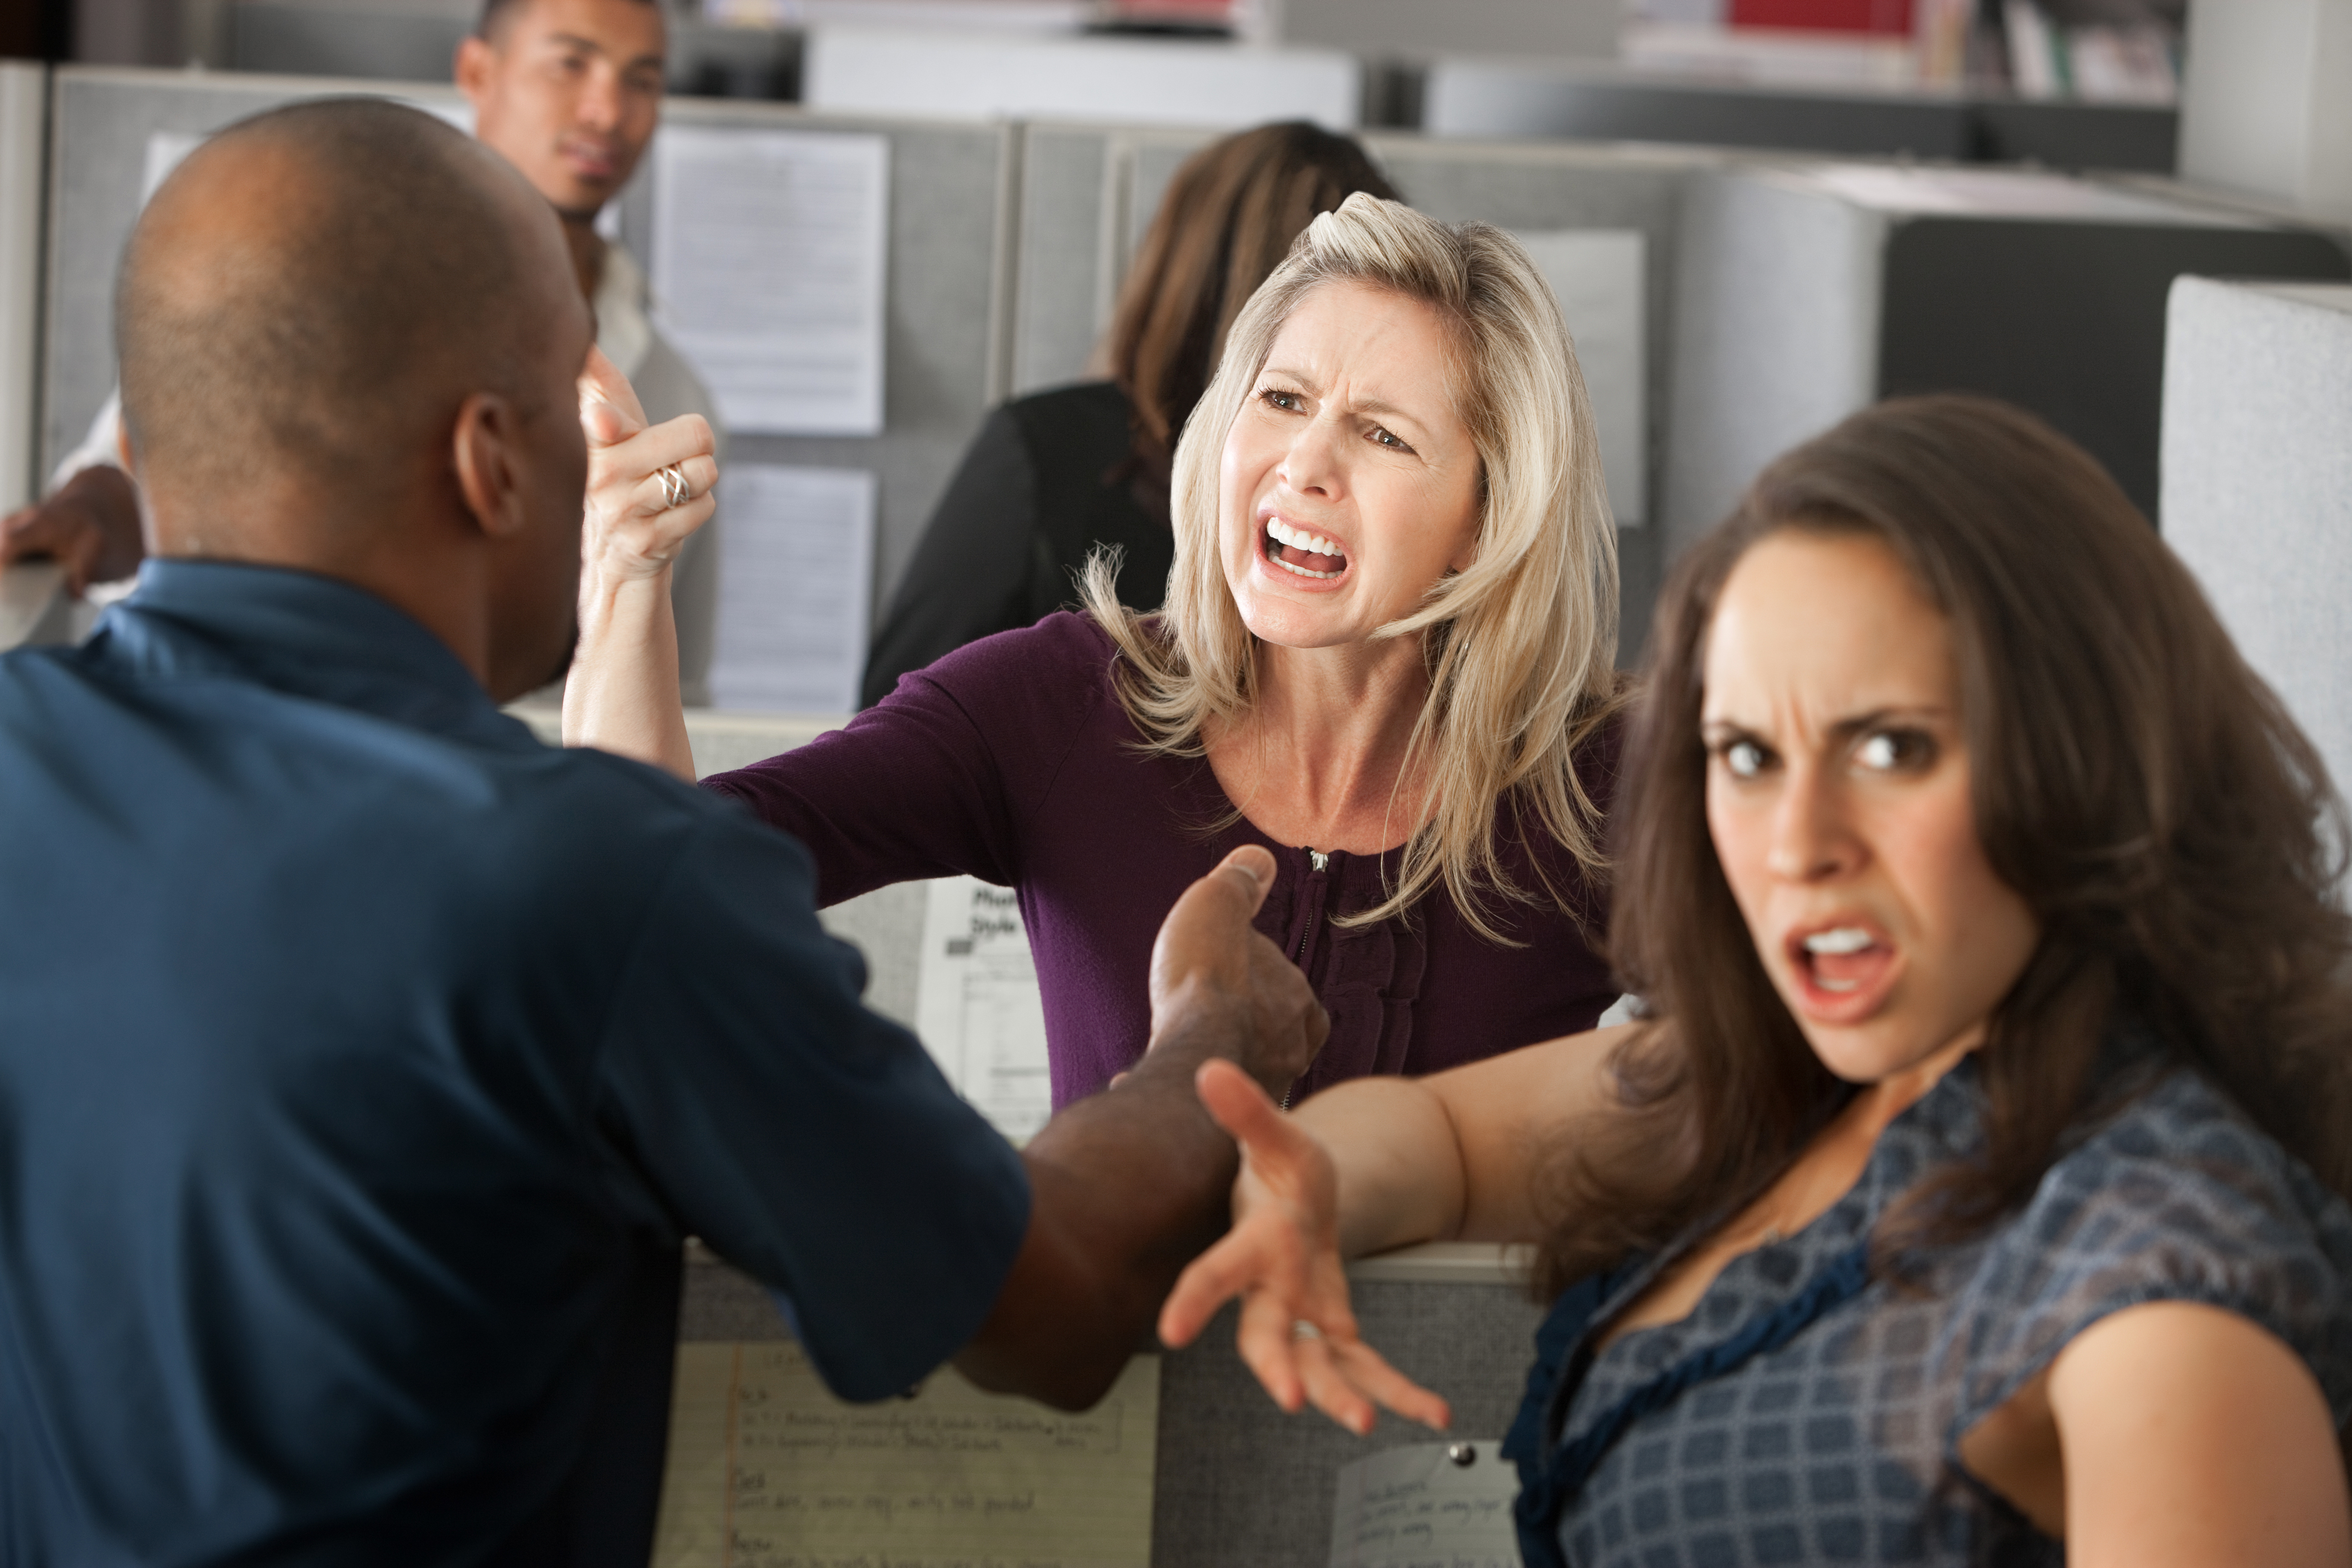 Chaos between a group of coworkers in office